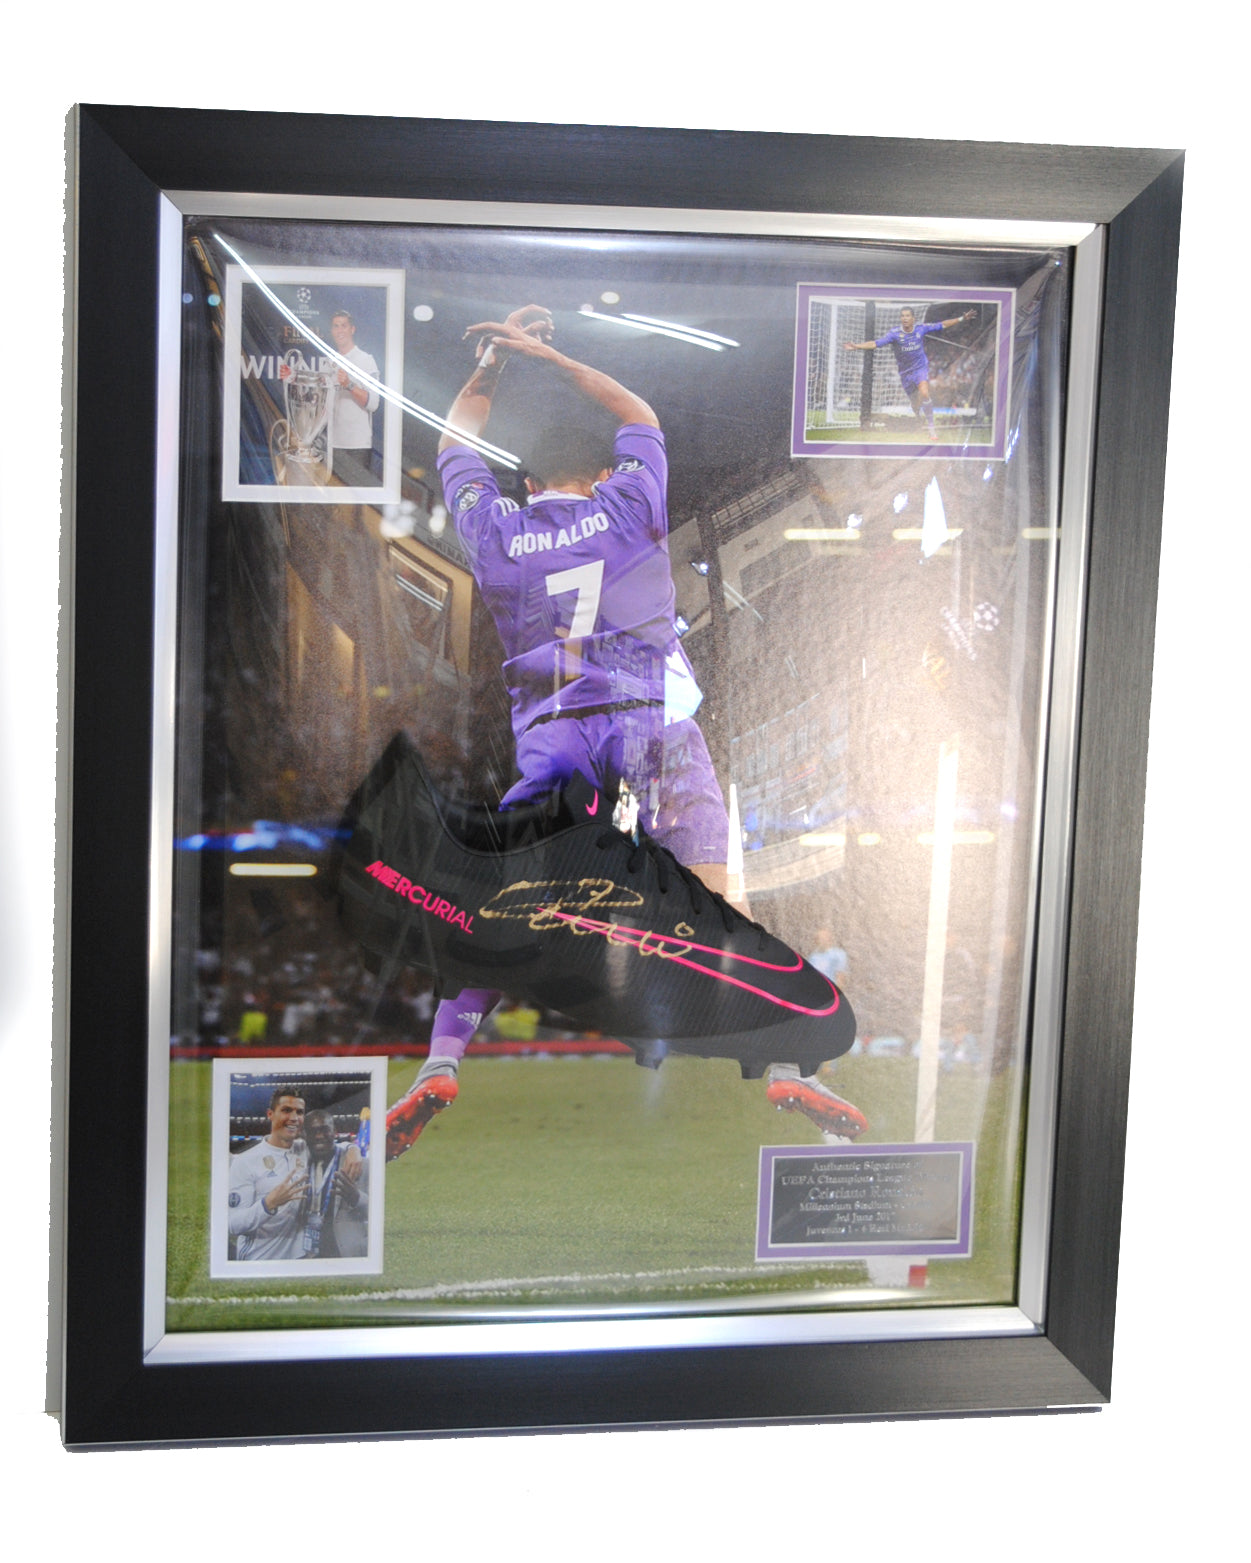 Signed Cristiano Ronaldo football boot and photos in acrylic dome (collection only)